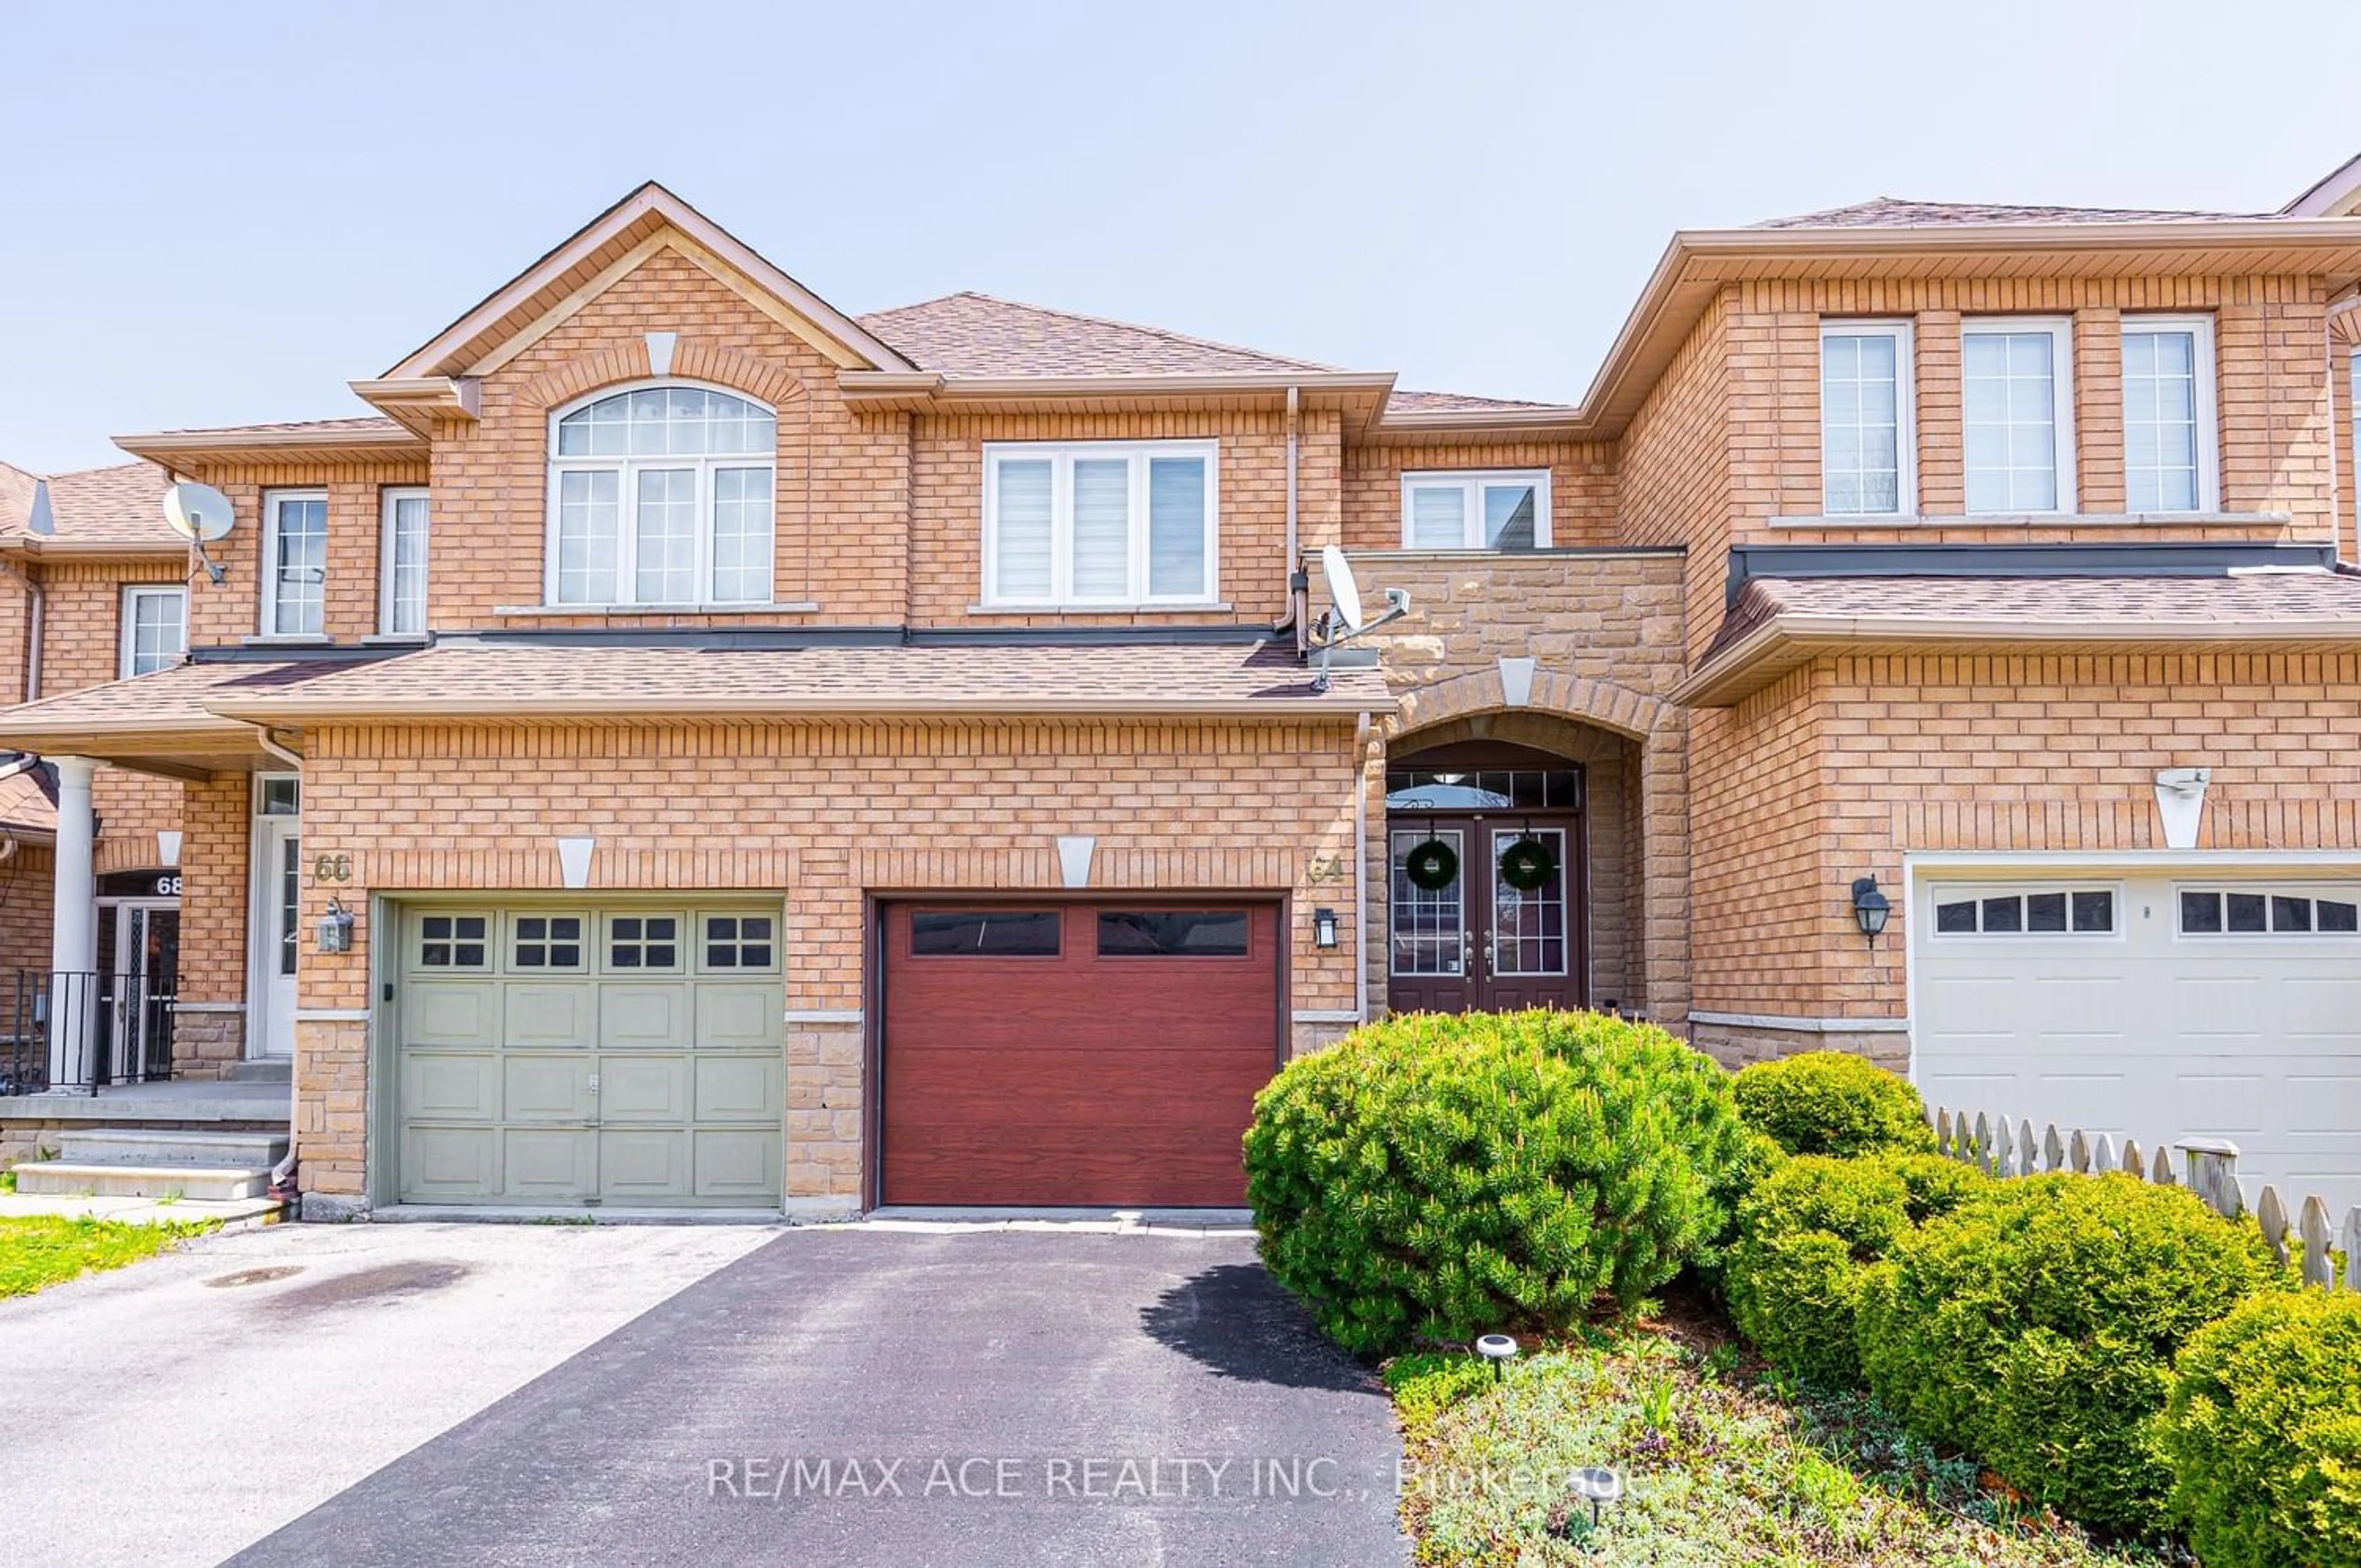 Home with brick exterior material for 64 Briarhall Cres, Markham Ontario L6C 2C9